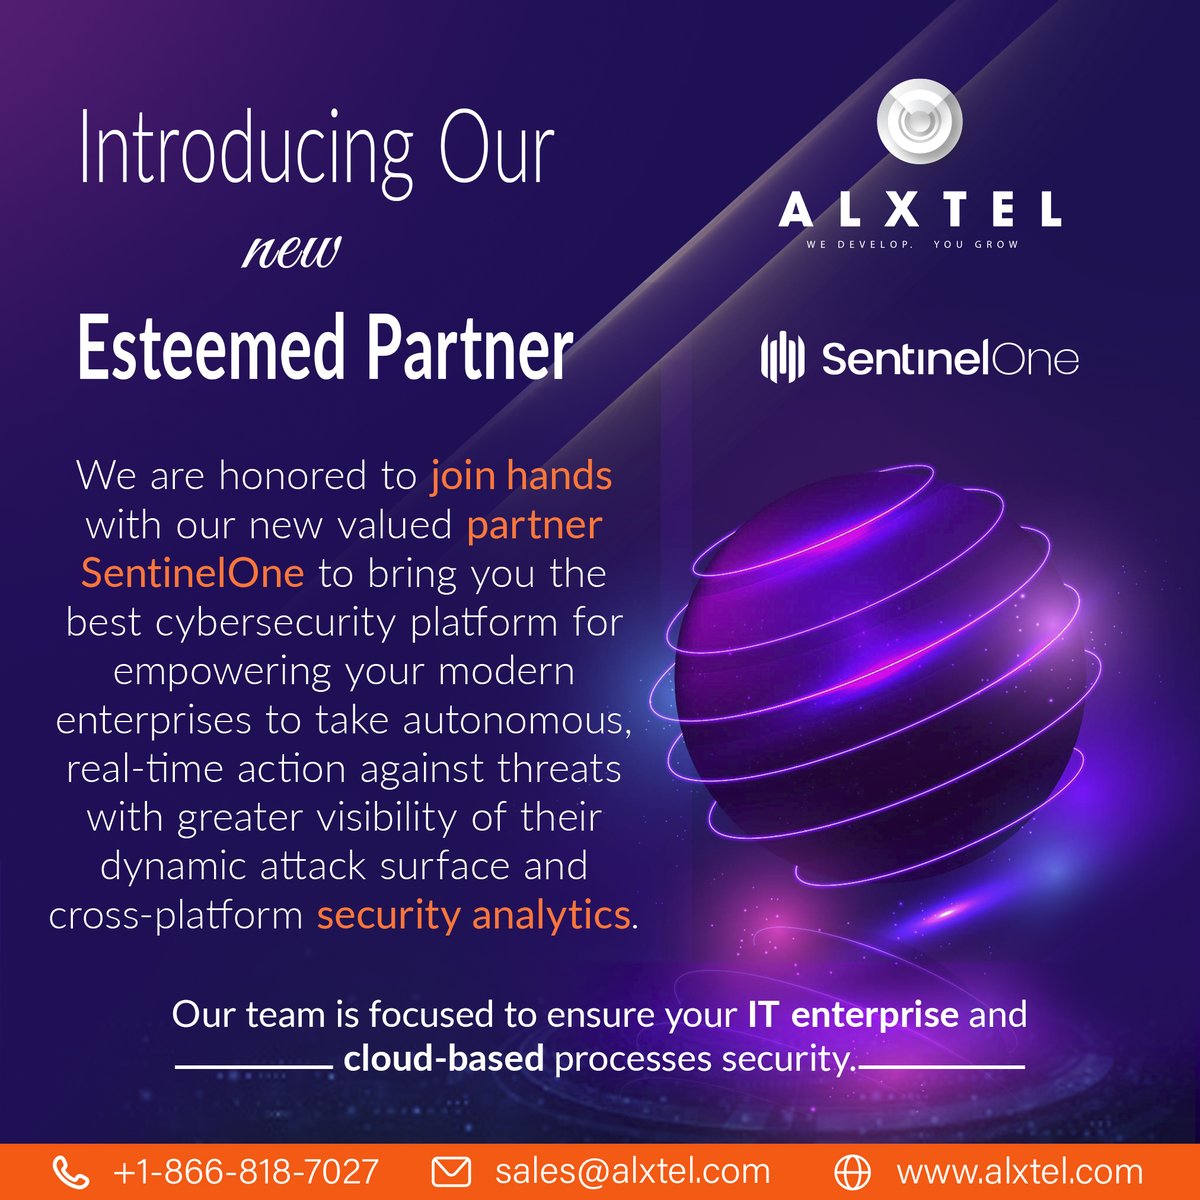 We are very excited to announce our newest partnership with SentinelOne which is the market leader in XDR technologies.

#cybersecurity #automation #xdr #endpointprotection #identitymanagement #cloudsecurity